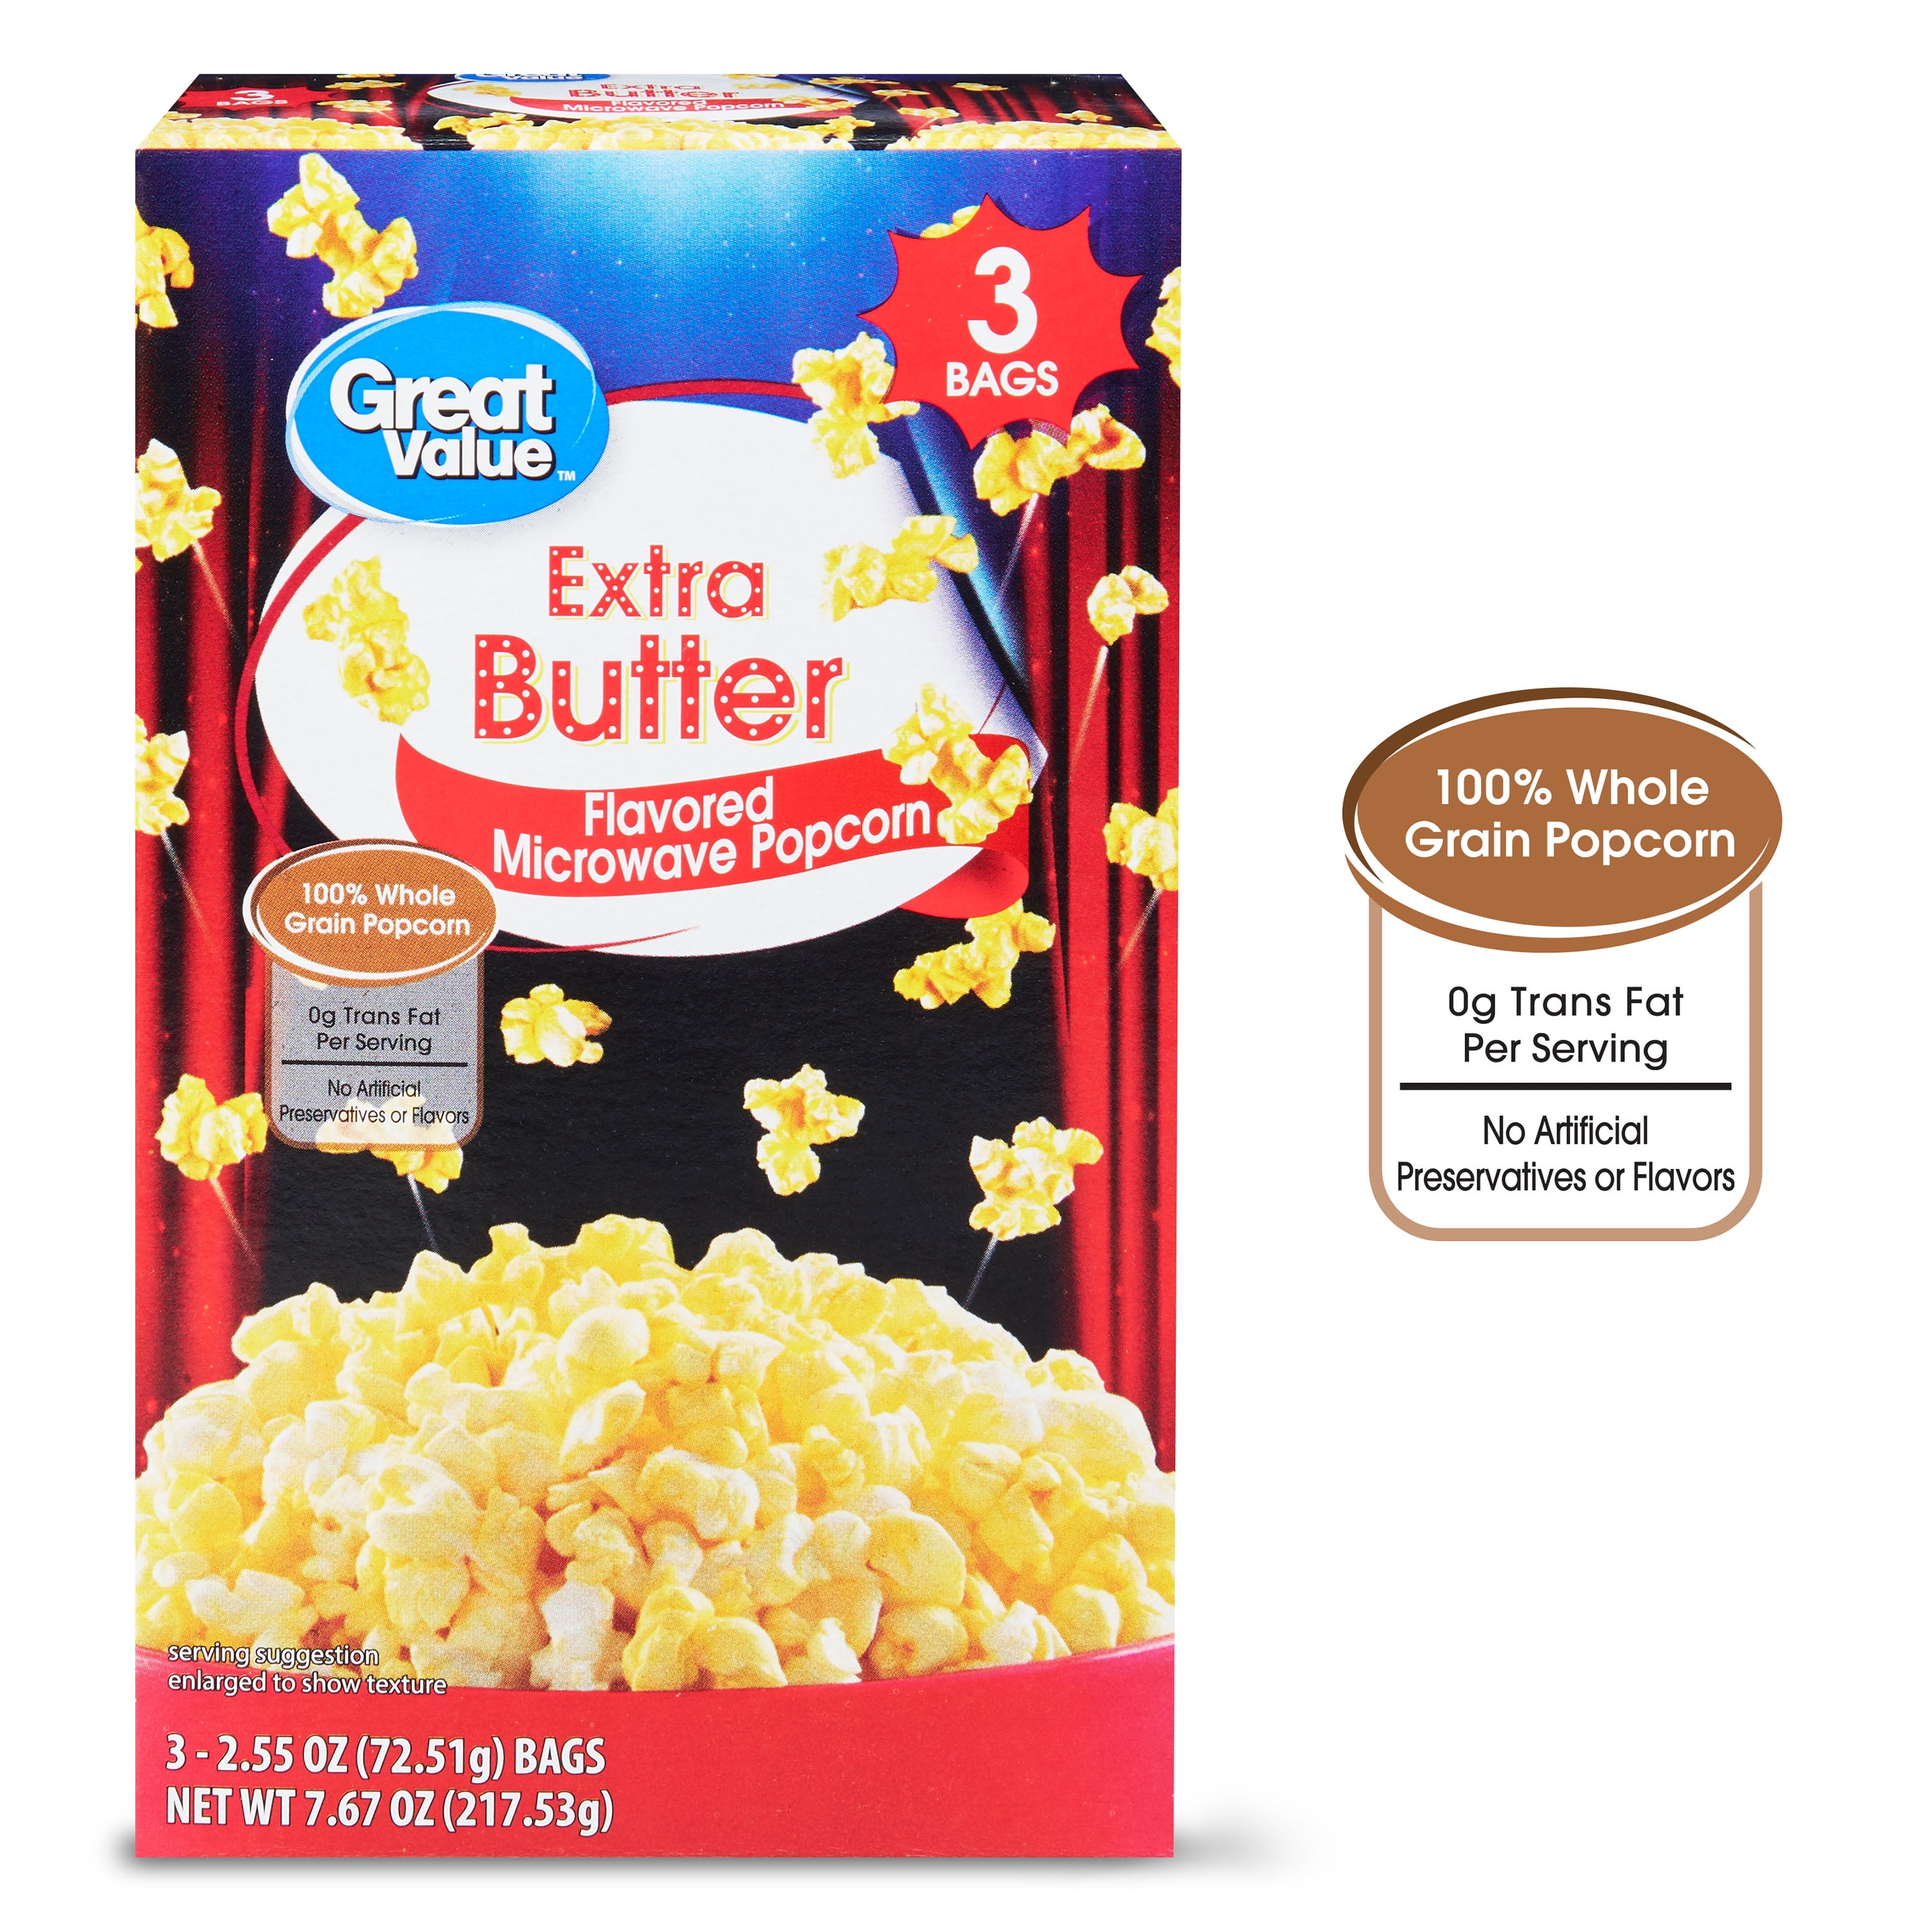 Great Value Flavored Microwave Popcorn, Extra Butter, 7.67 oz, 3 Count